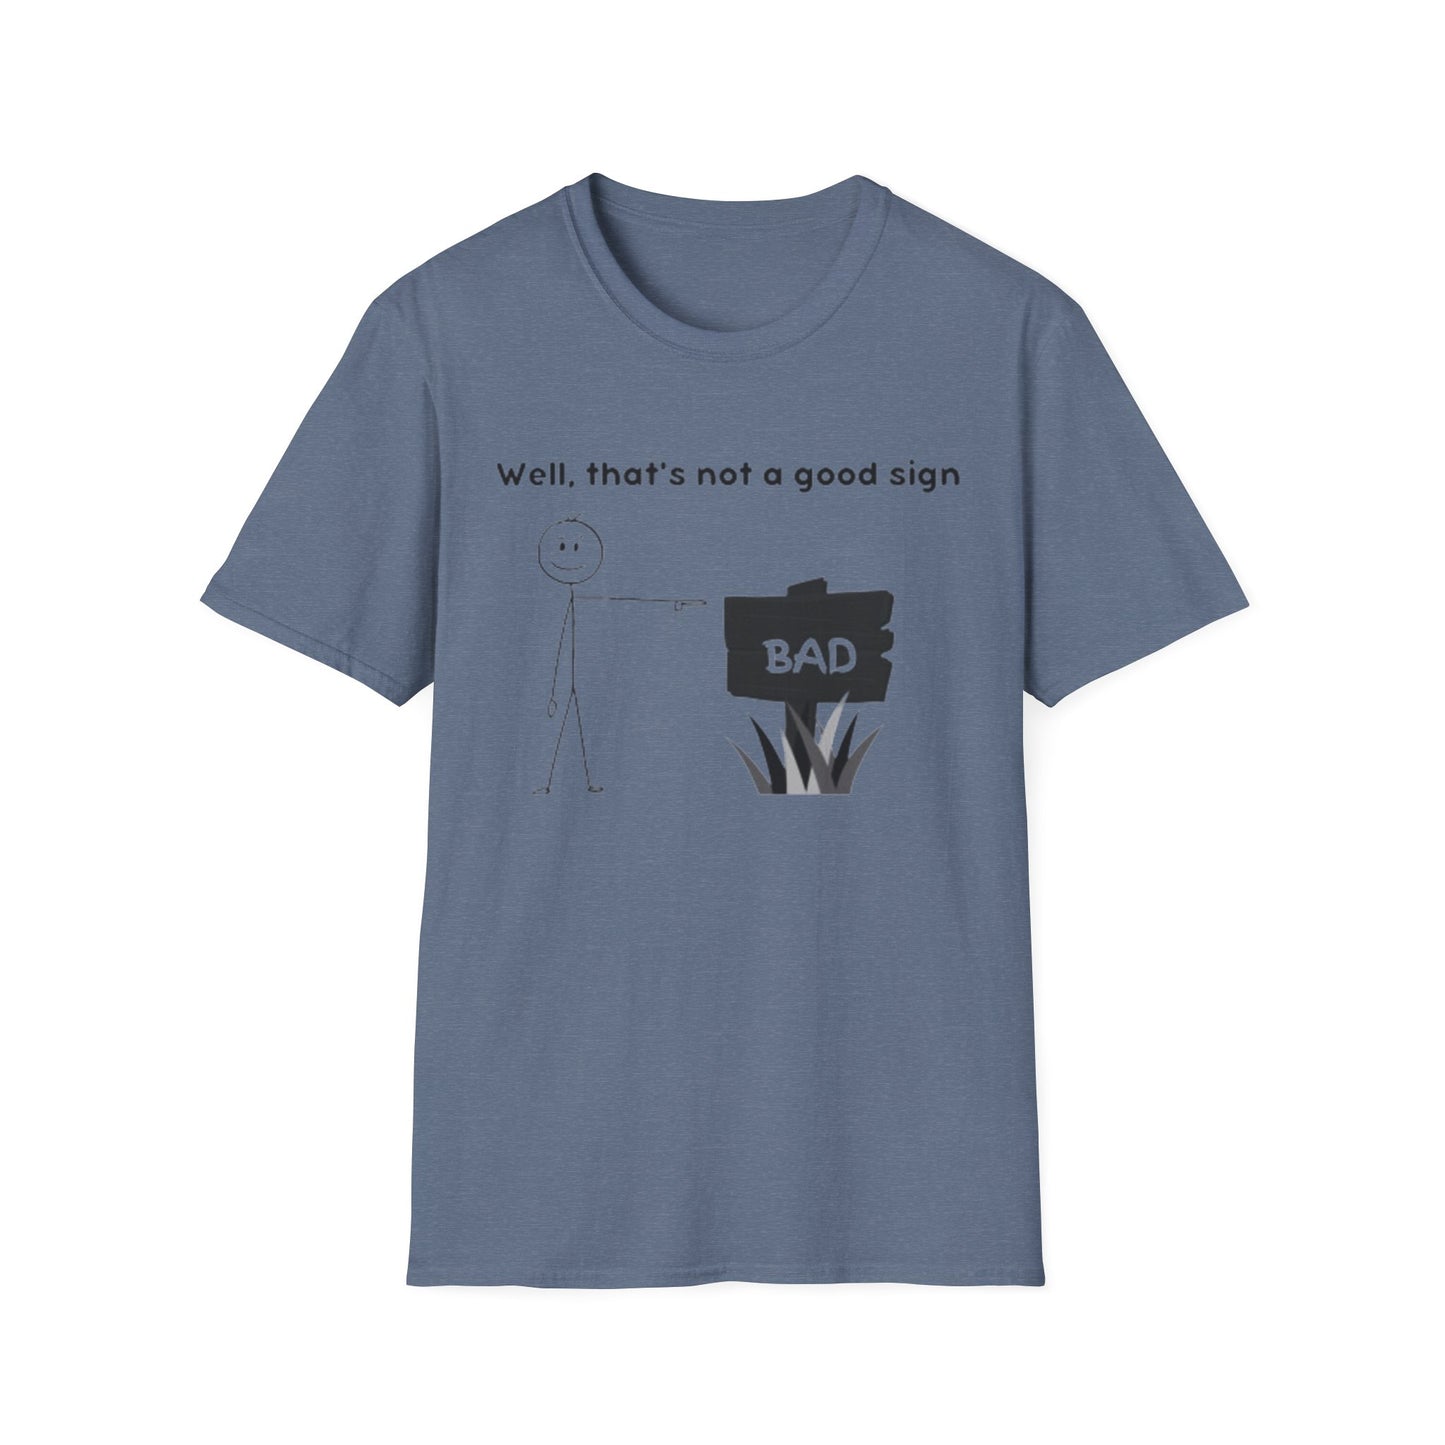 Well, That’s not a good sign - Unisex Softstyle T-Shirt